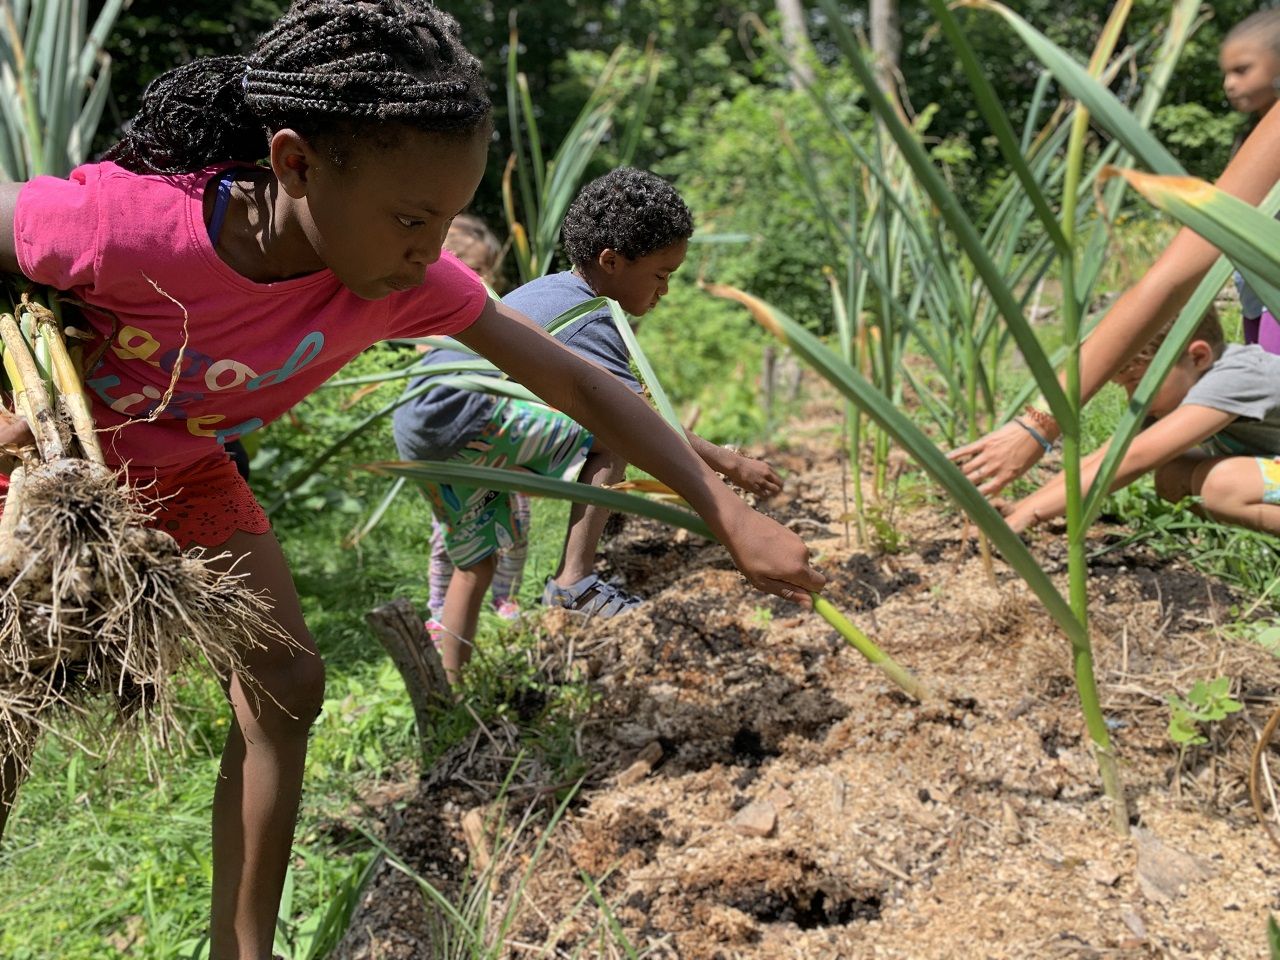 Young Roots Farm teaches city youth about food, farming, and looking after the earth